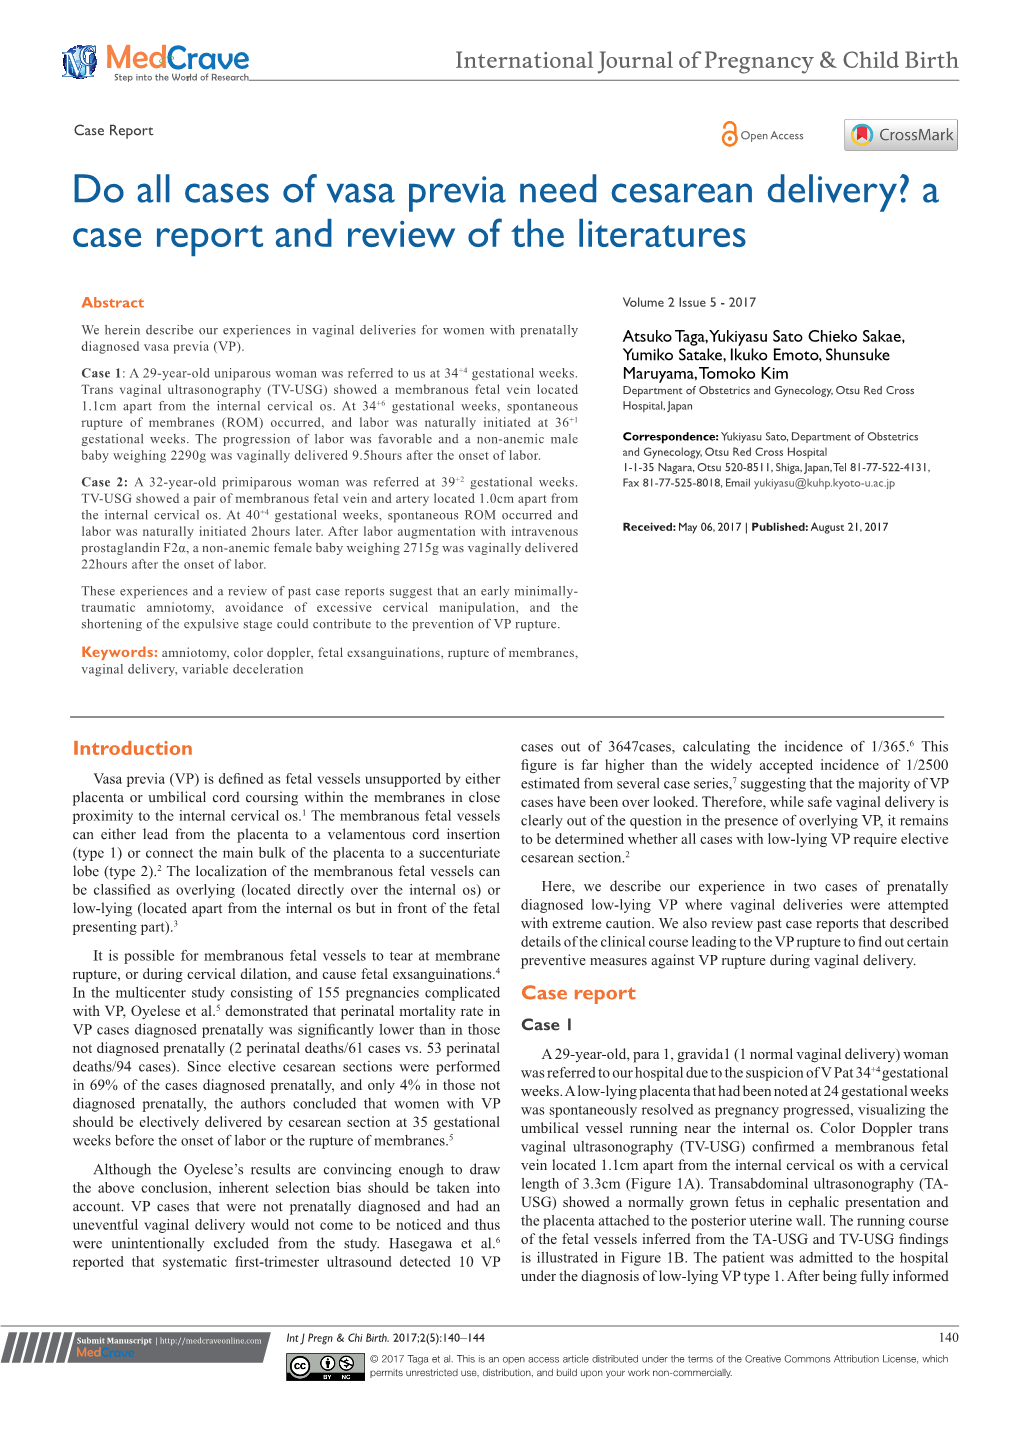 Do All Cases of Vasa Previa Need Cesarean Delivery? a Case Report and Review of the Literatures